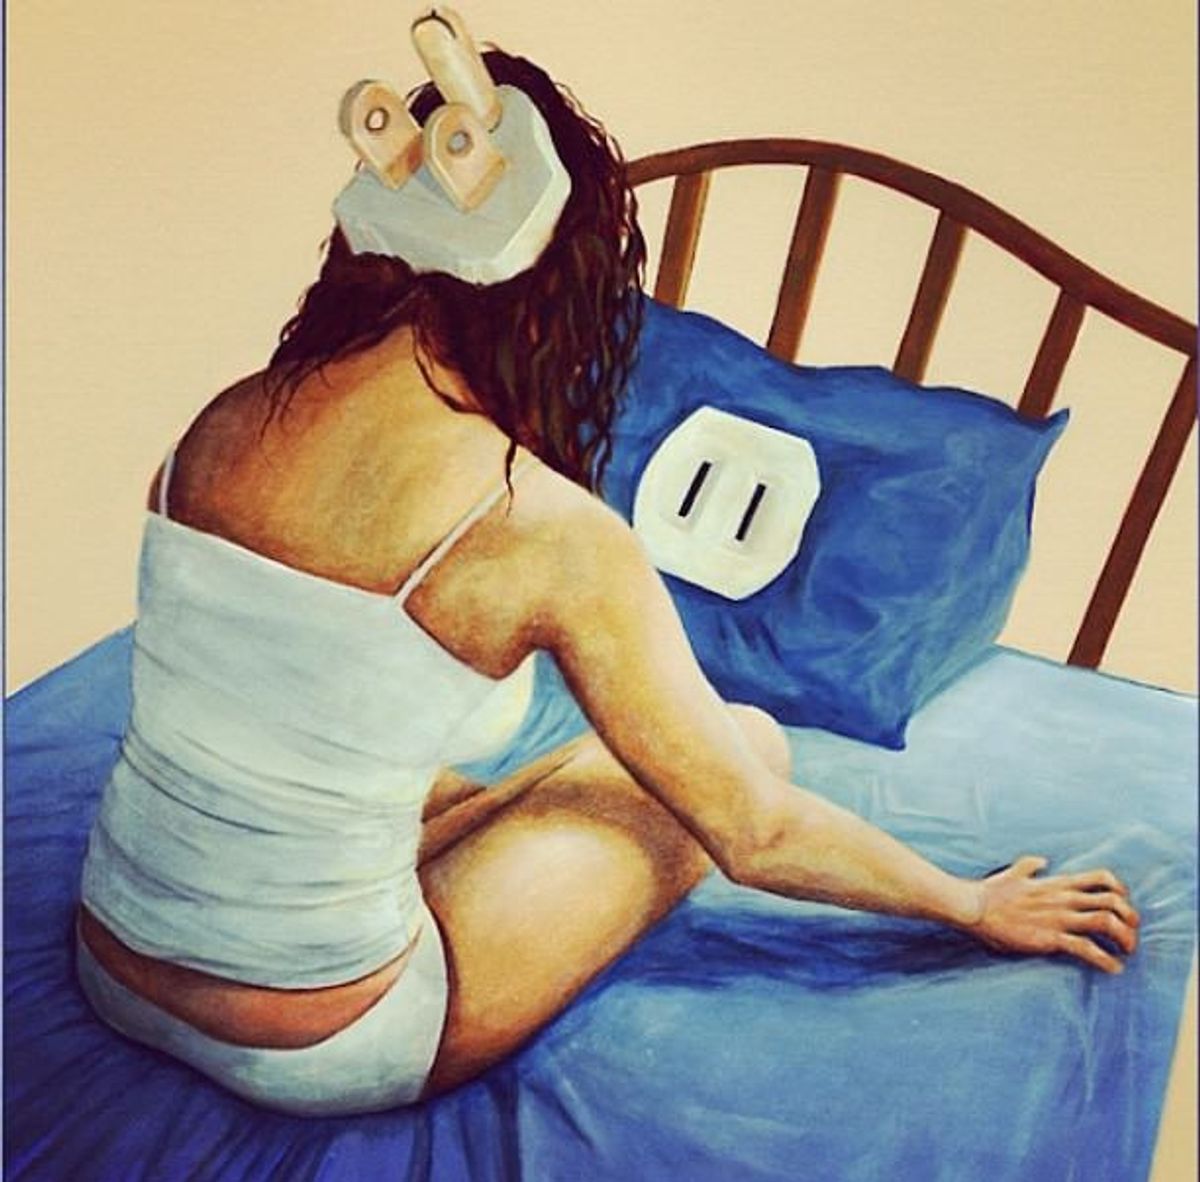 14 Signs You're an Insomniac